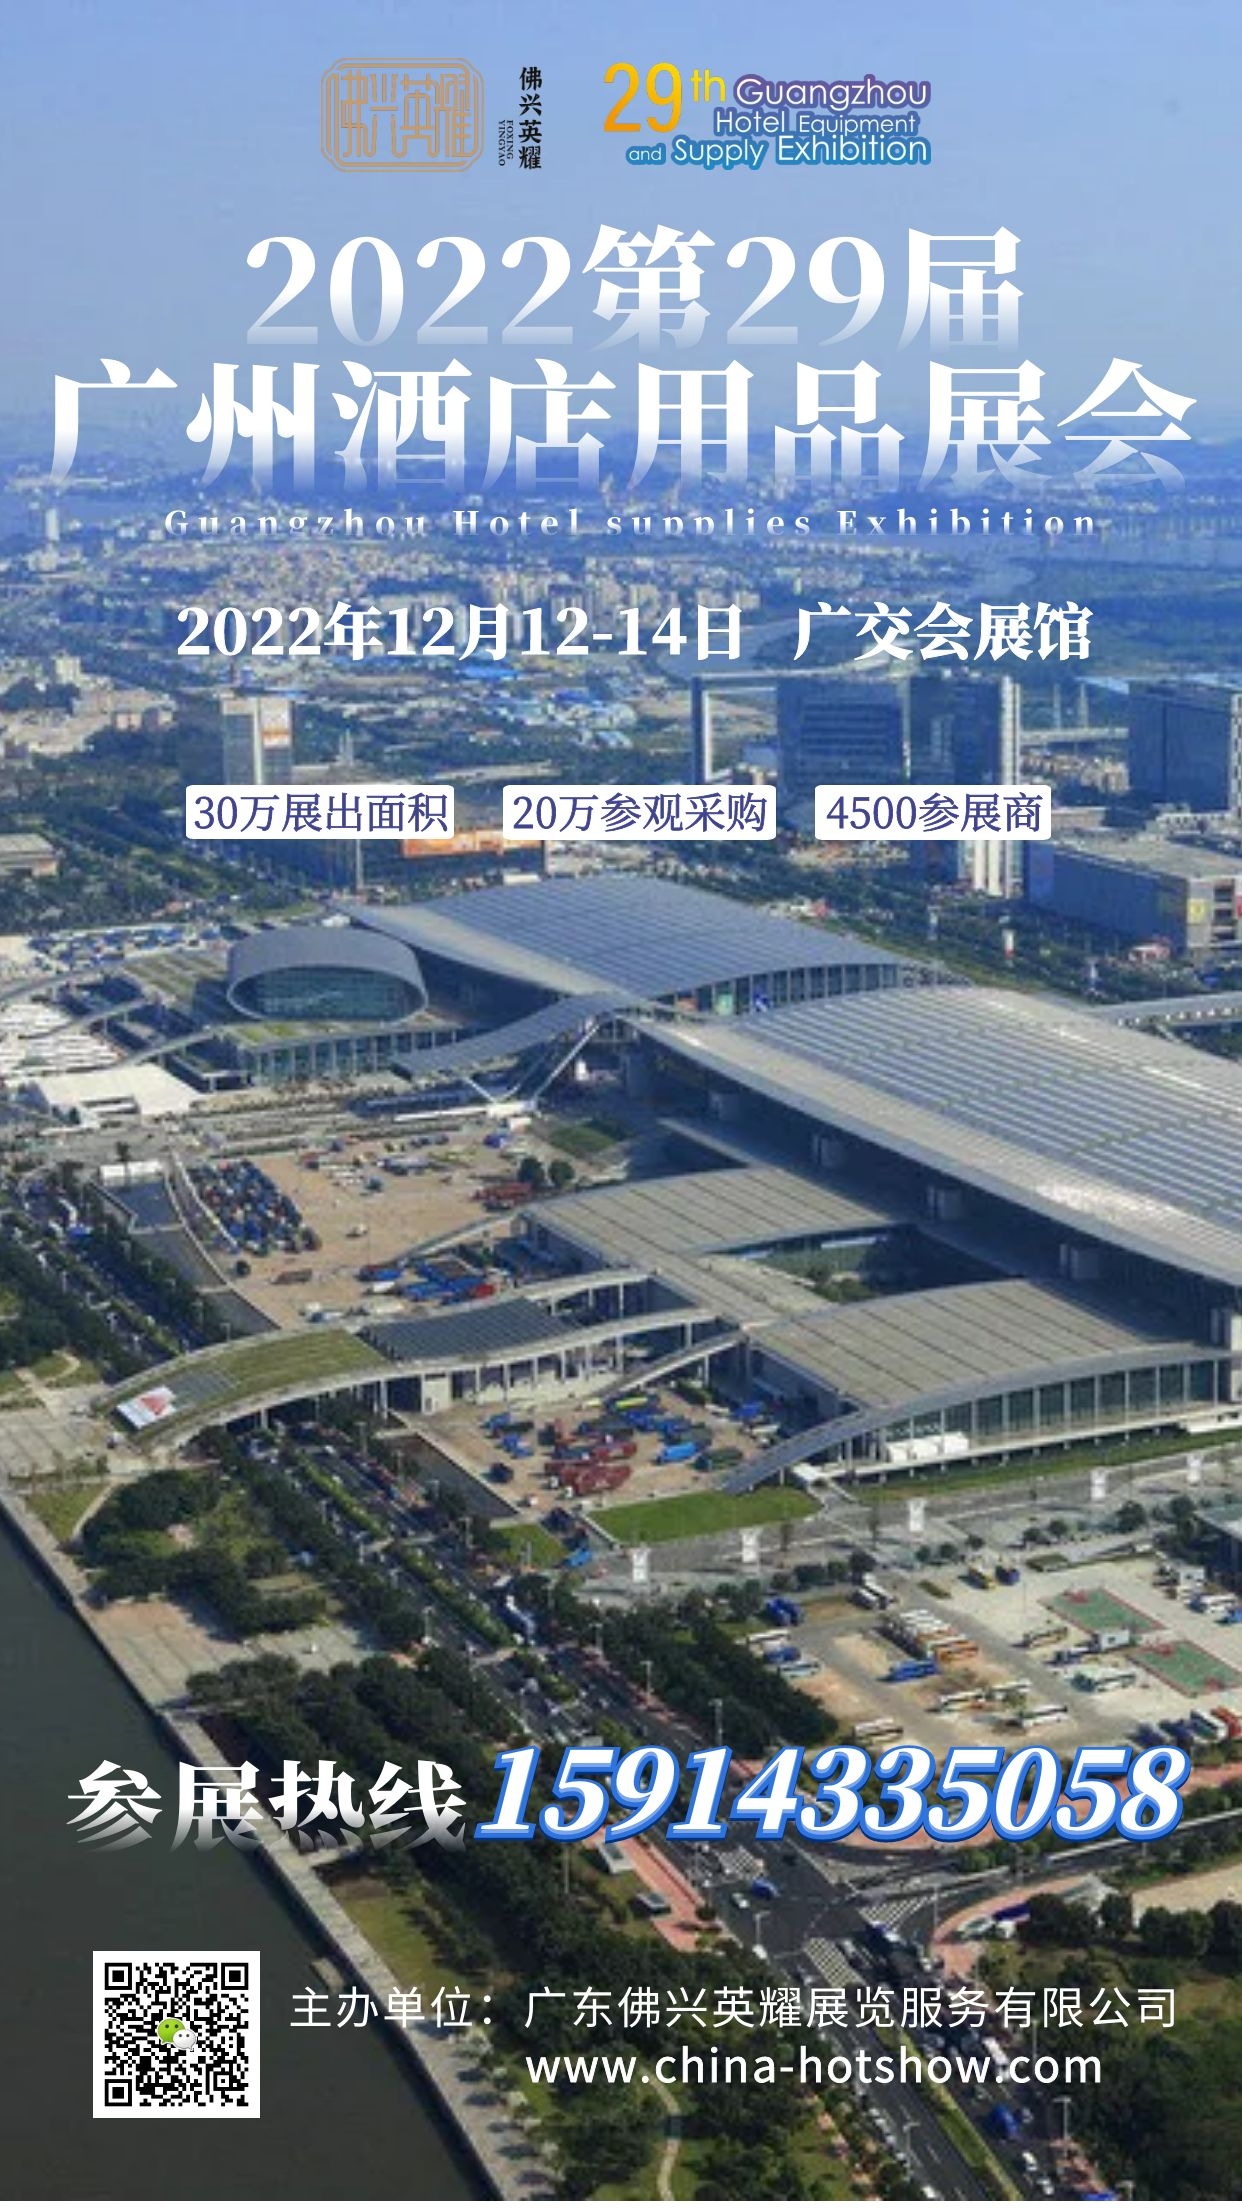 2022 Guangzhou Hotel Supplies Exhibition is attracting investment